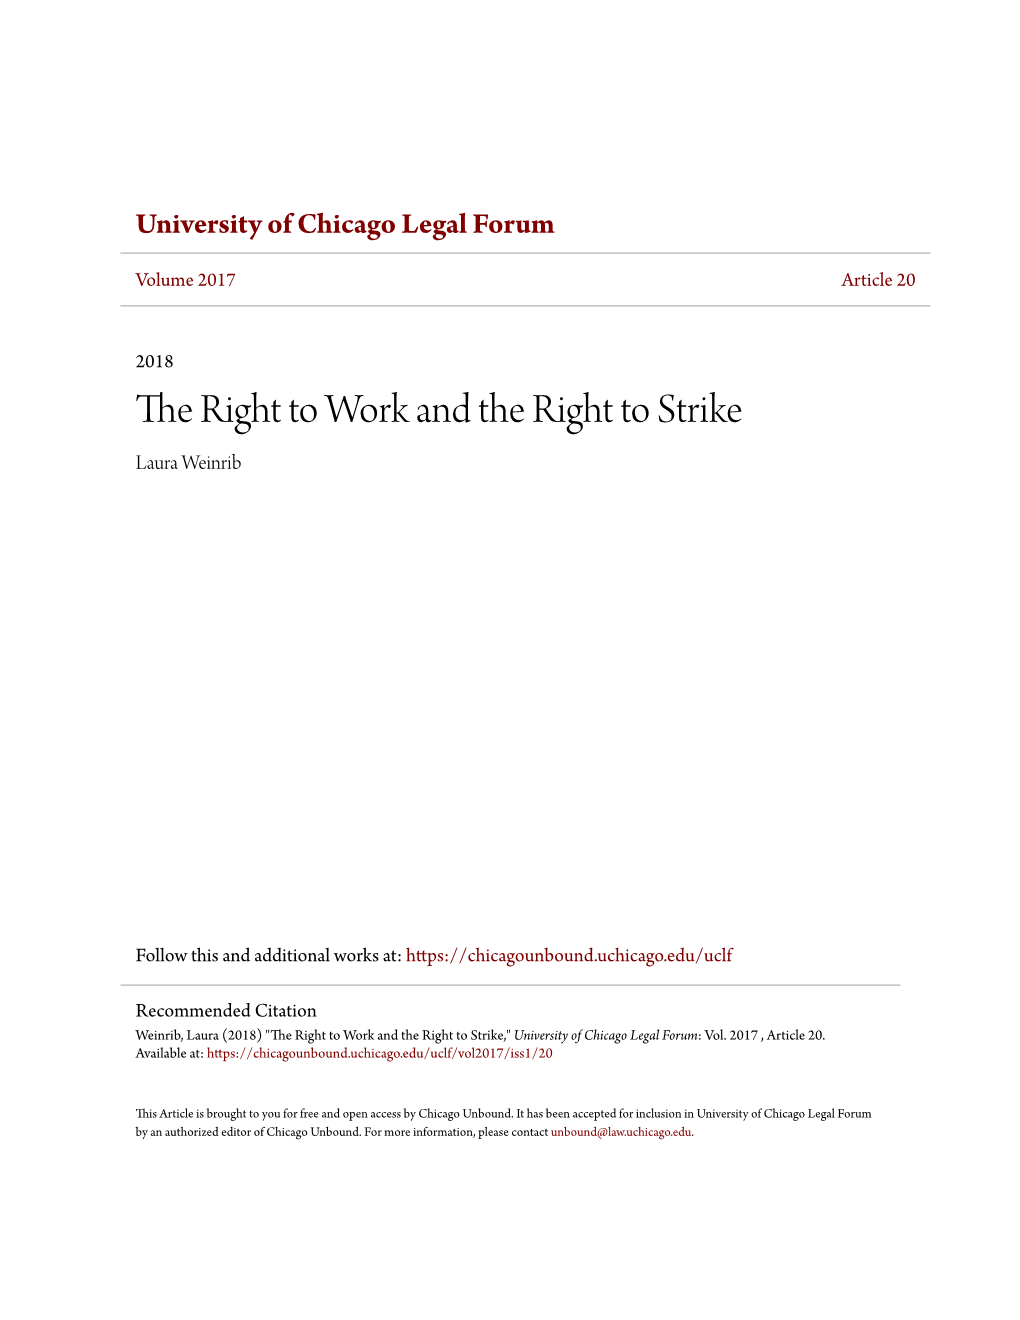 The Right to Work and the Right to Strike Laura Weinrib